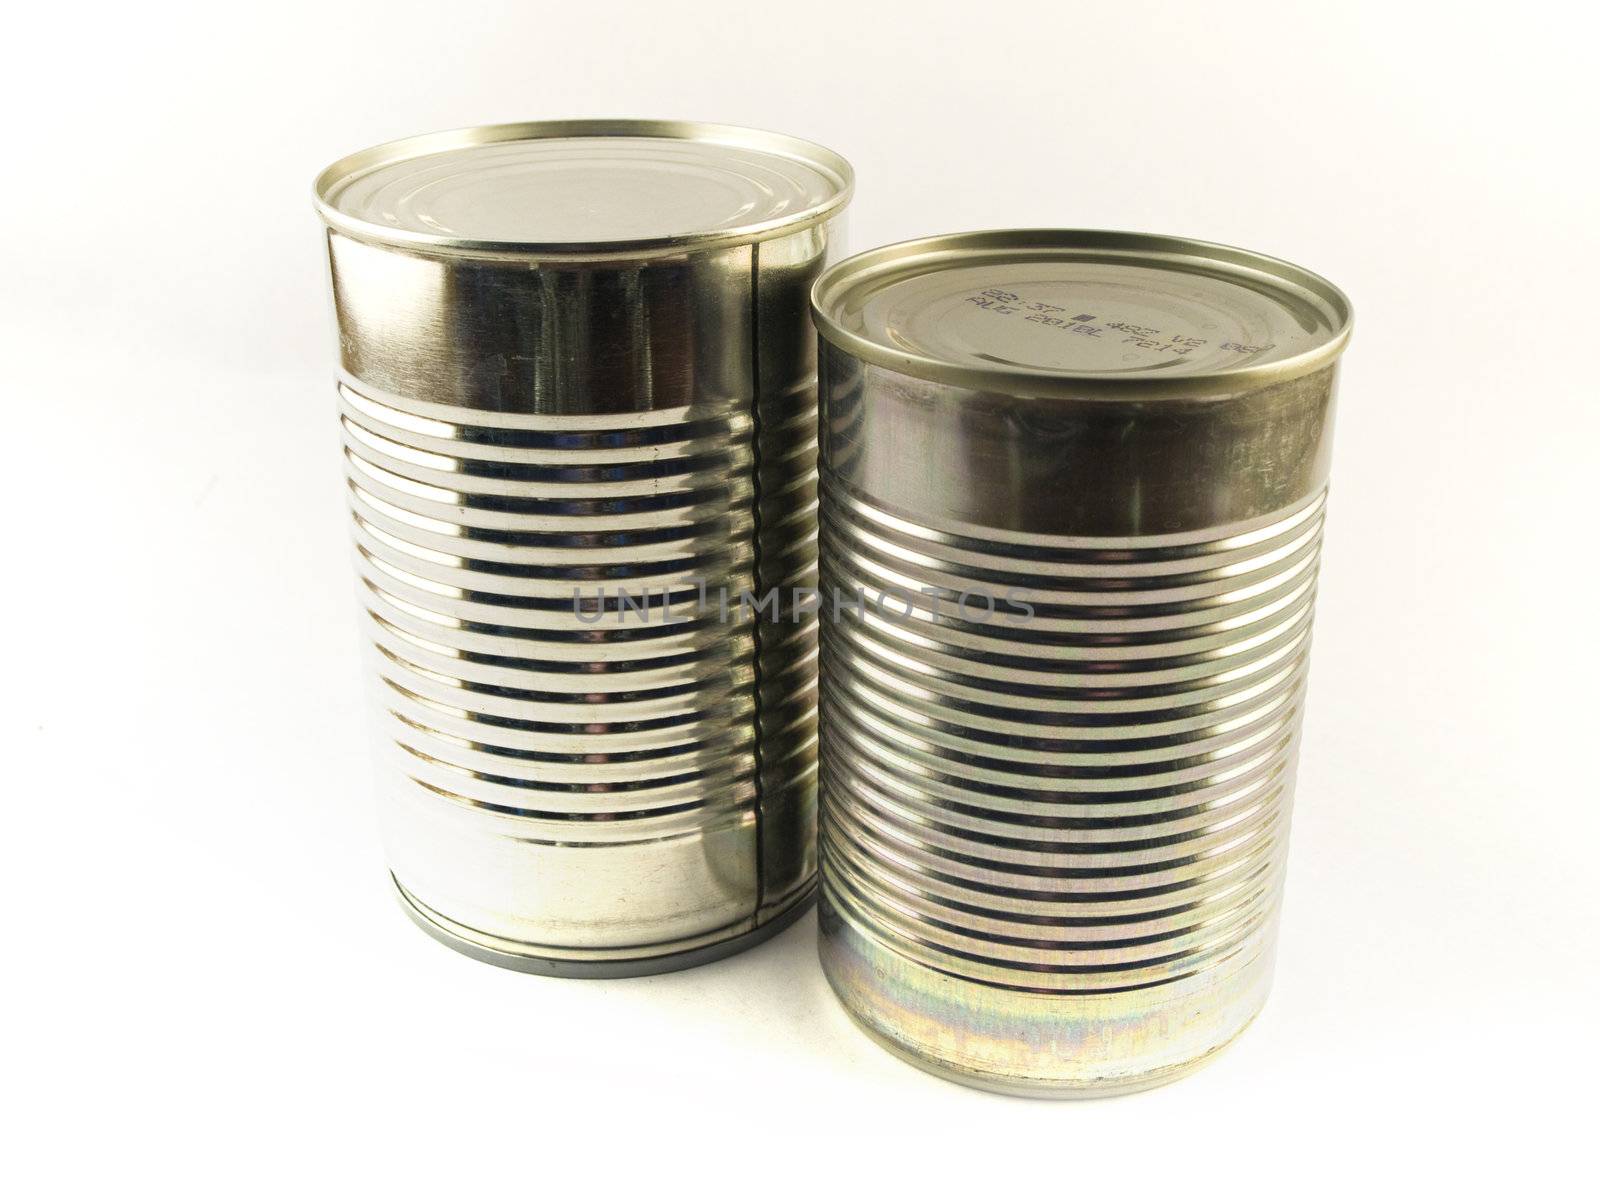 Two Shiny Food Tin Cans on White Background by bobbigmac